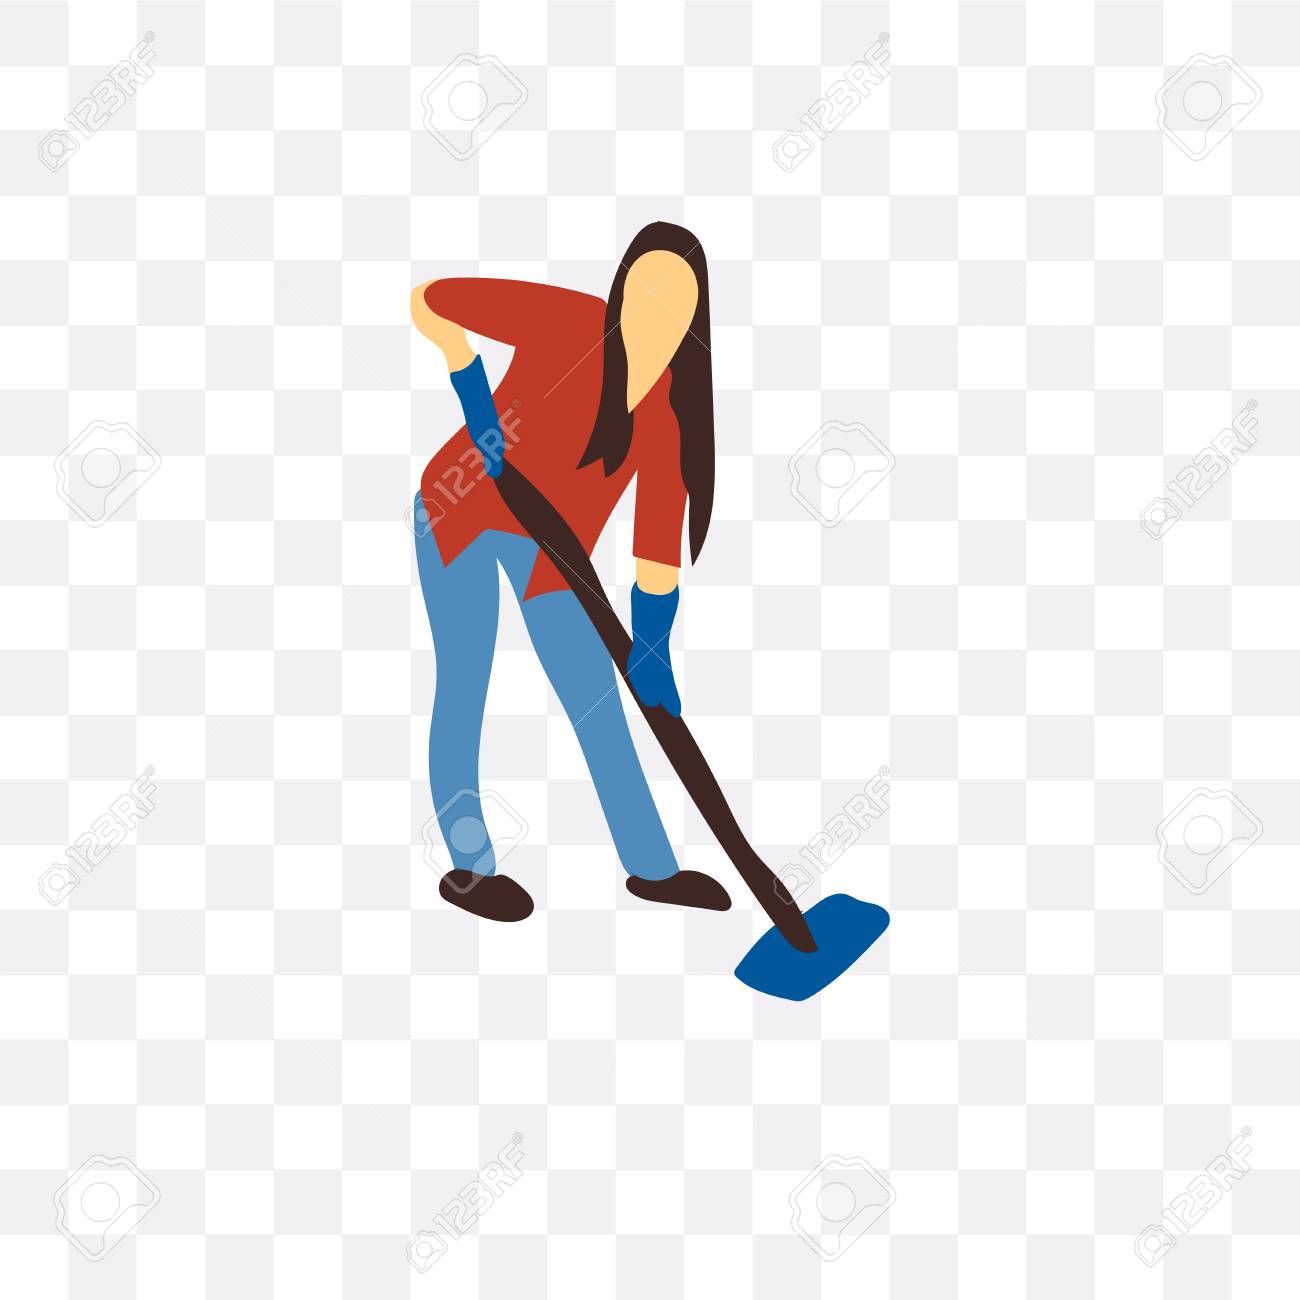 Sweeper Vector Icon Isolated On Transparent Background